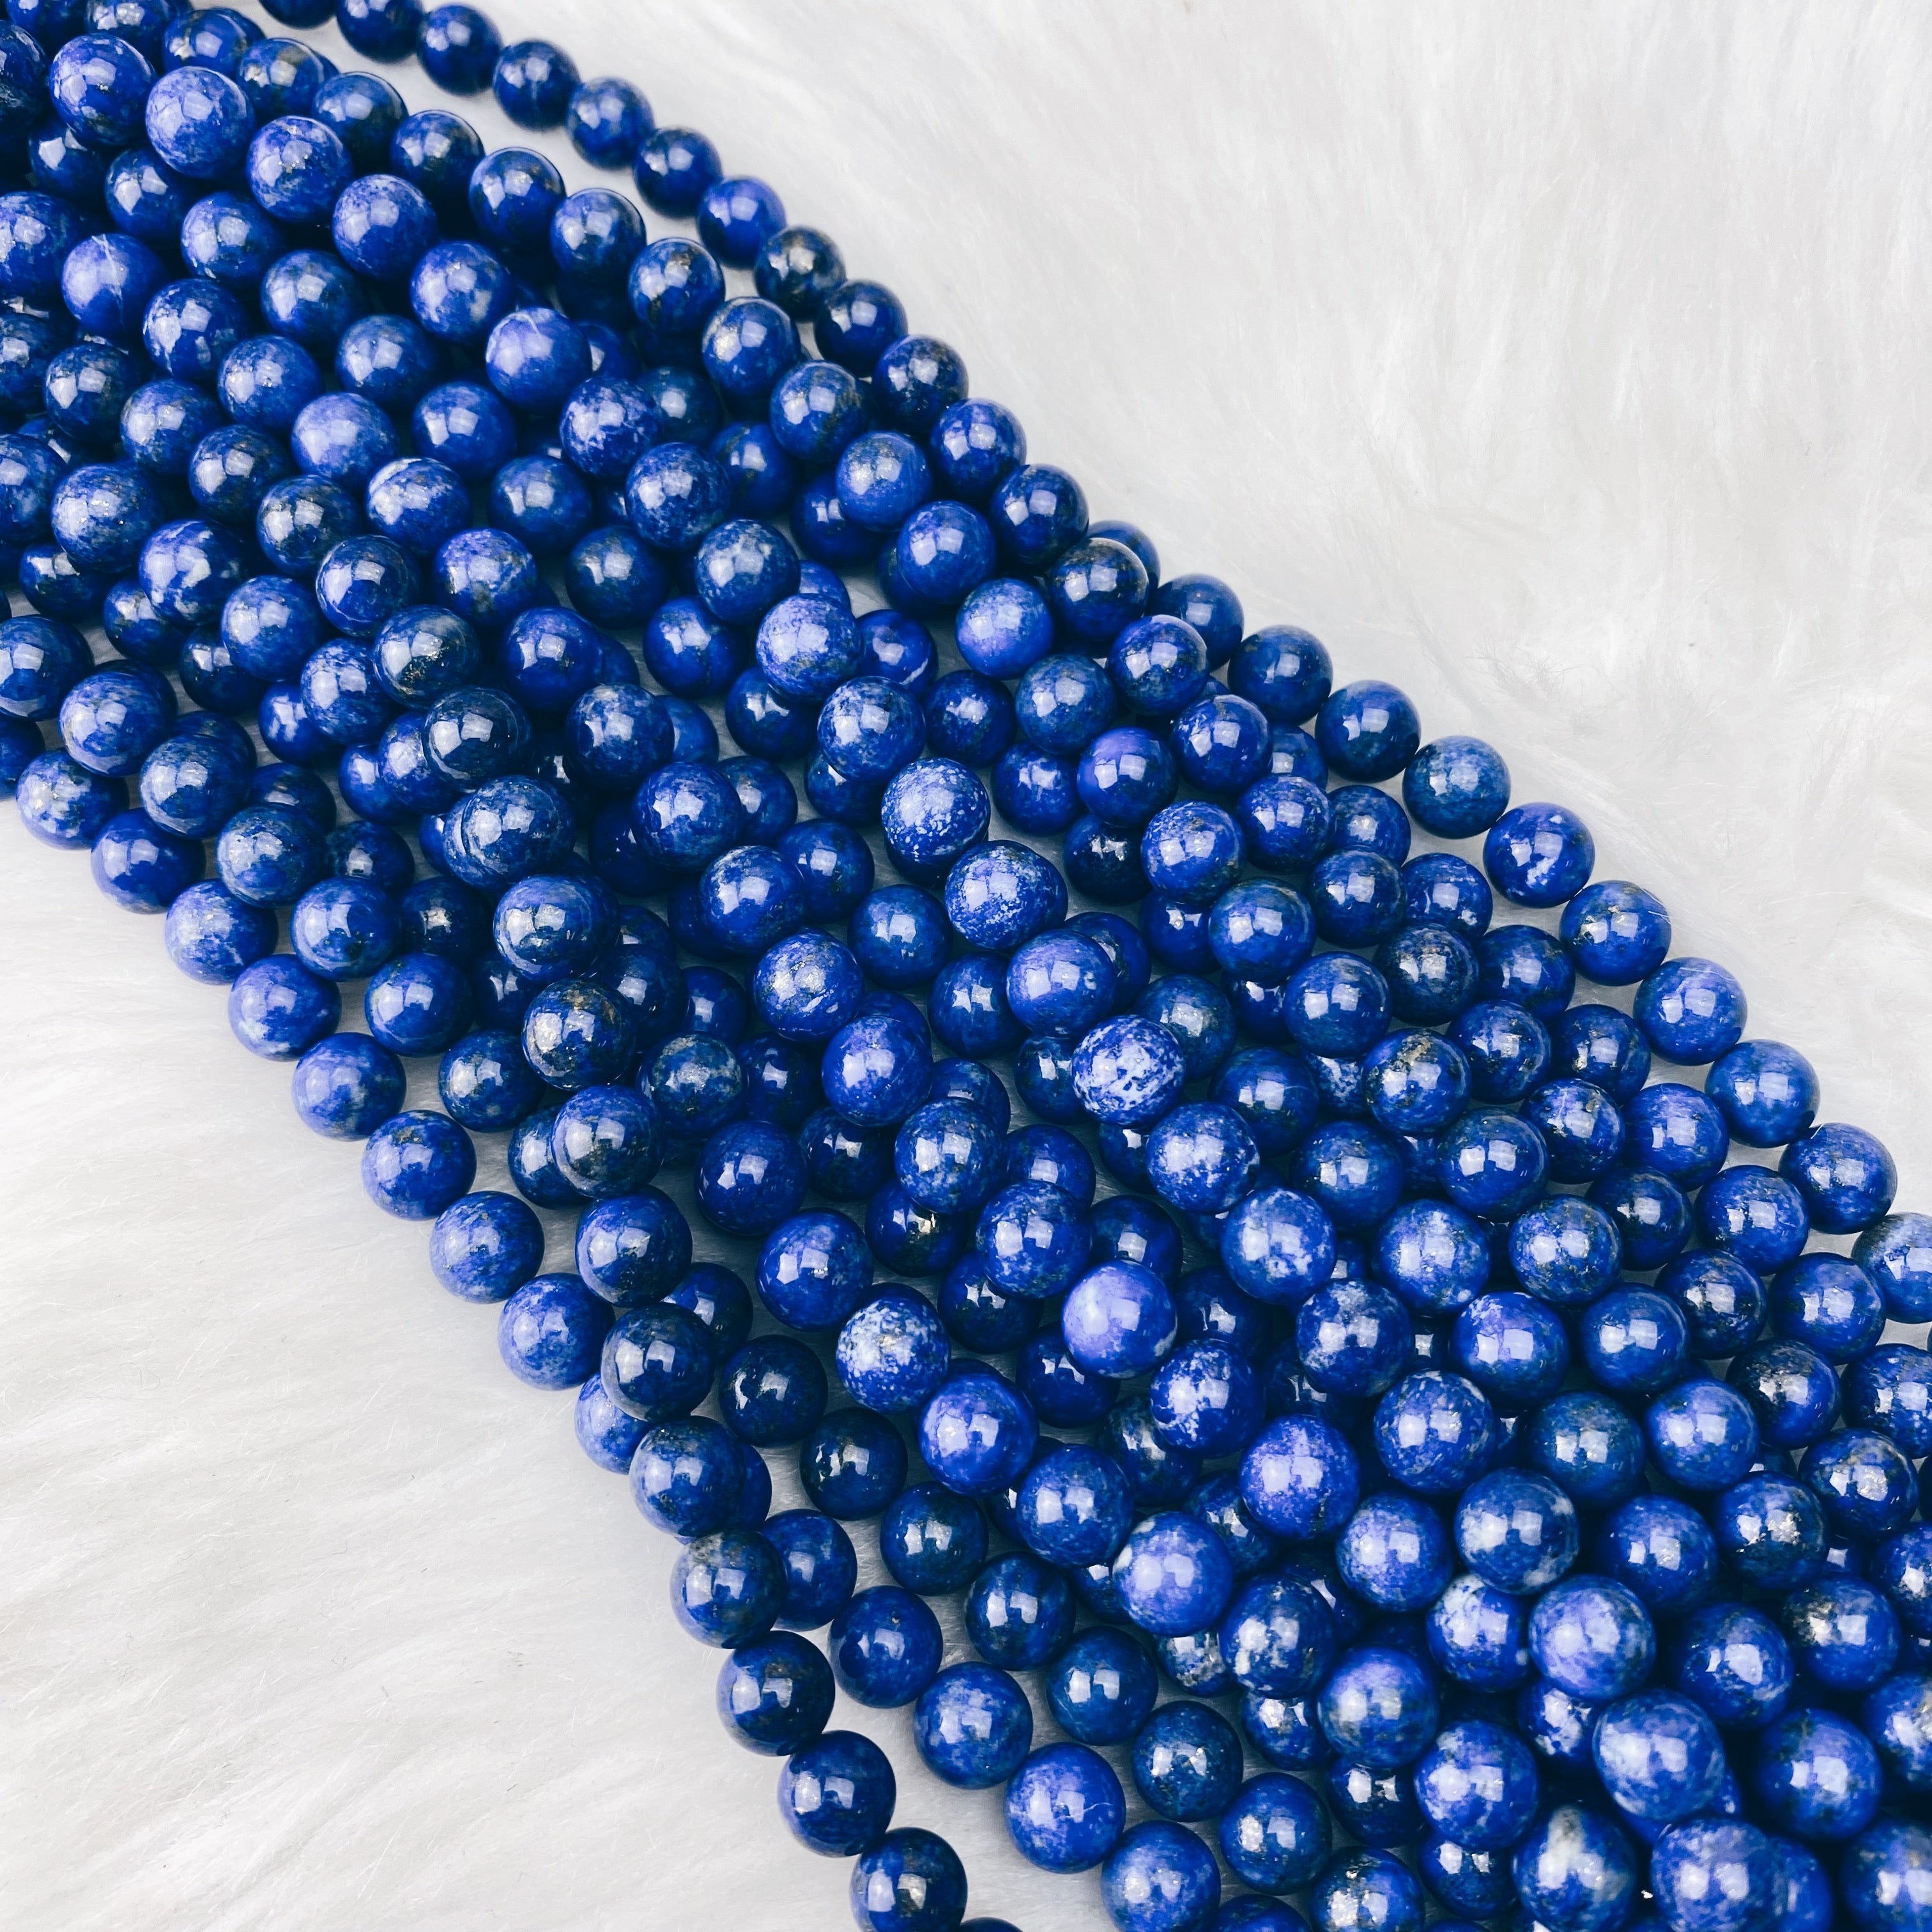 Lapis lazuli, 8mm round, natural gem beads for sale online - pearl jewelry  wholesale